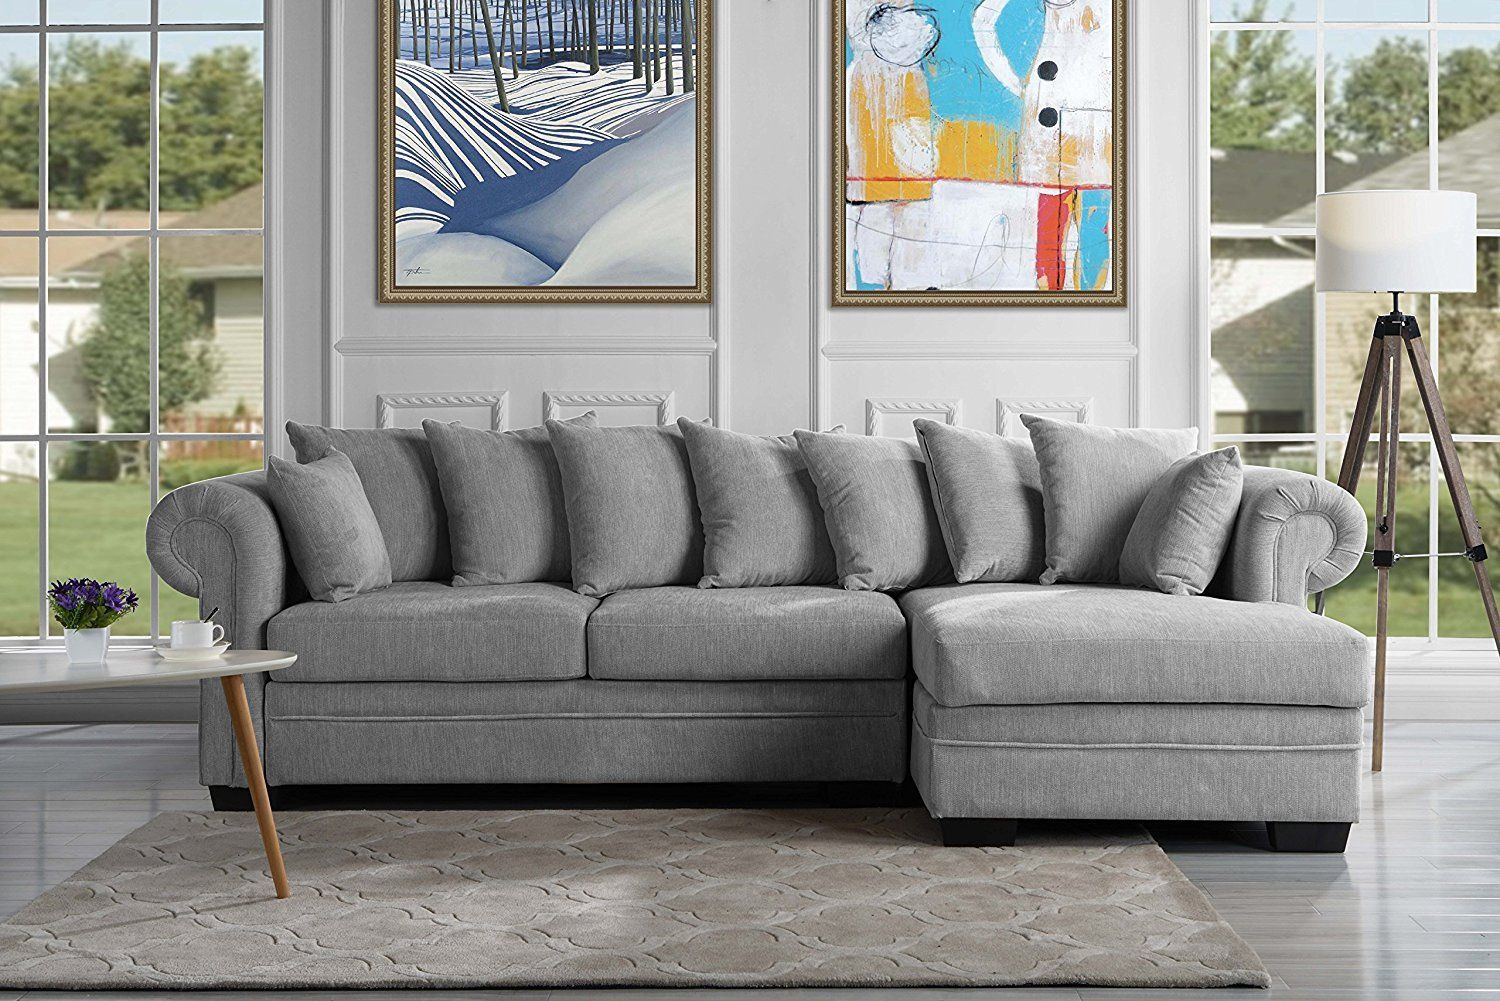 Modern Large Sectional Sofa, L Shape Couch W/ Extra Wide Chaise, Light Pertaining To Modern L Shaped Sofa Sectionals (Gallery 11 of 20)